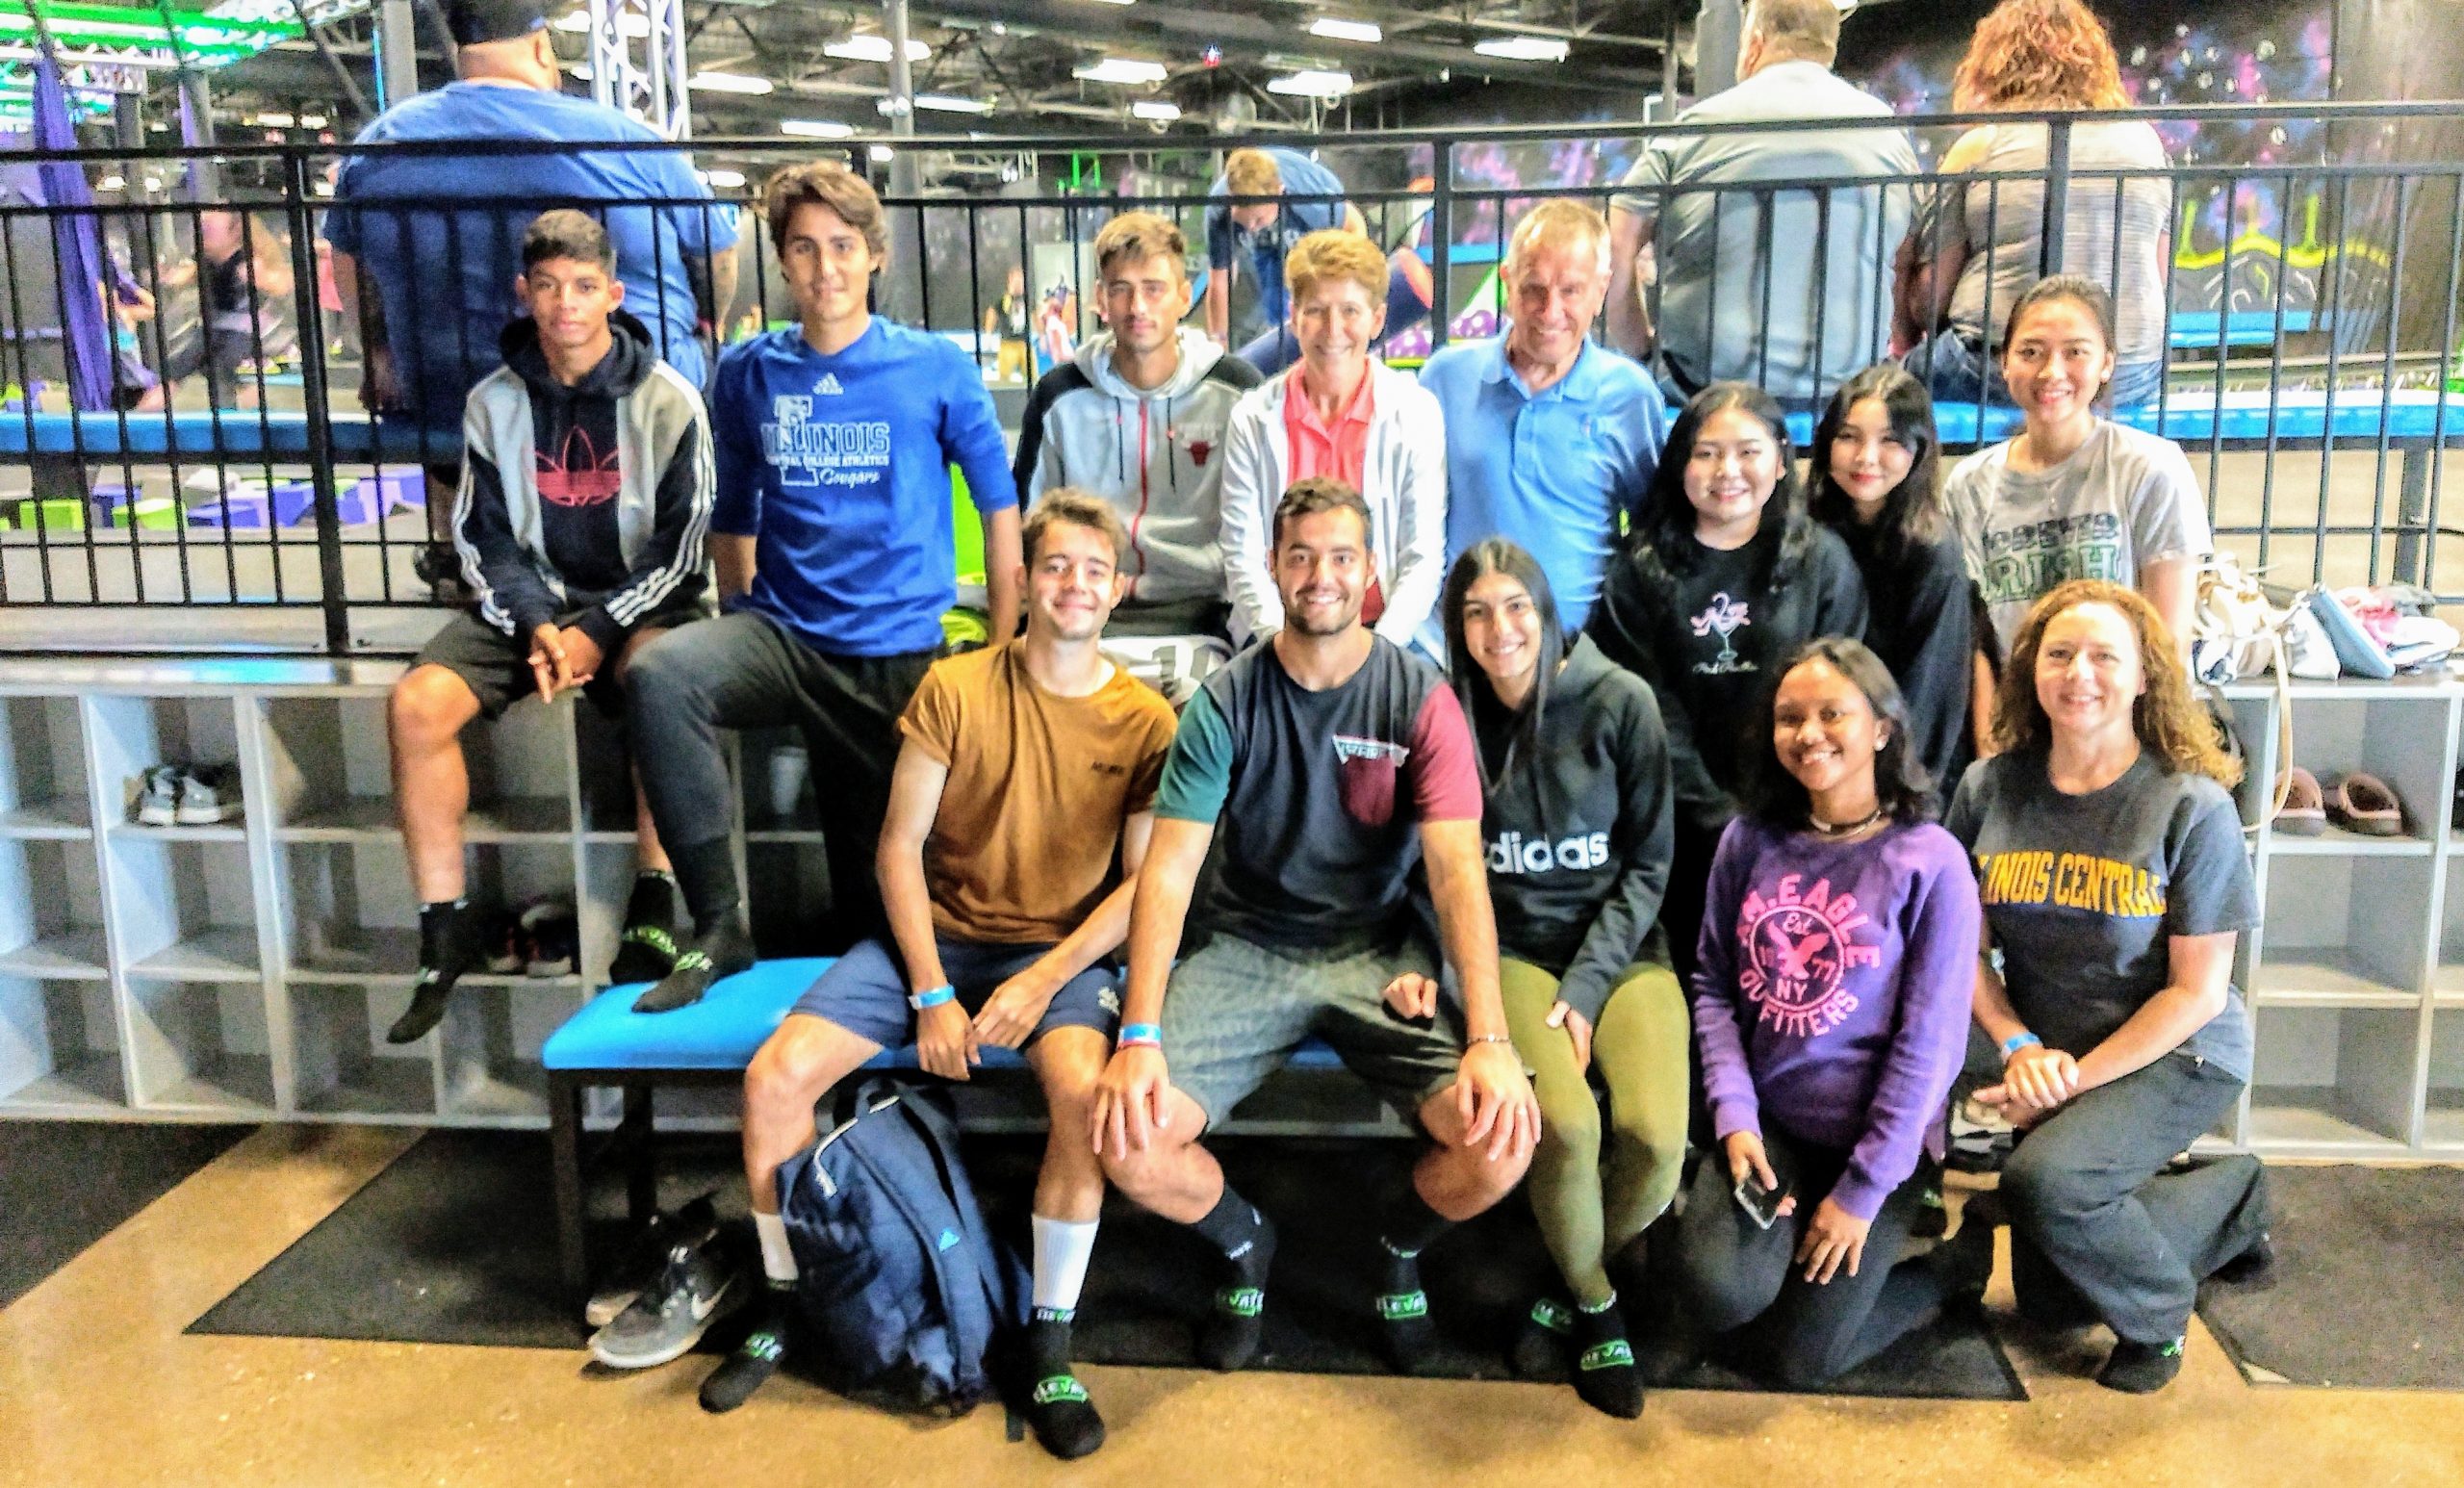 Elevate Trampoline Park and Lunch in East Peoria